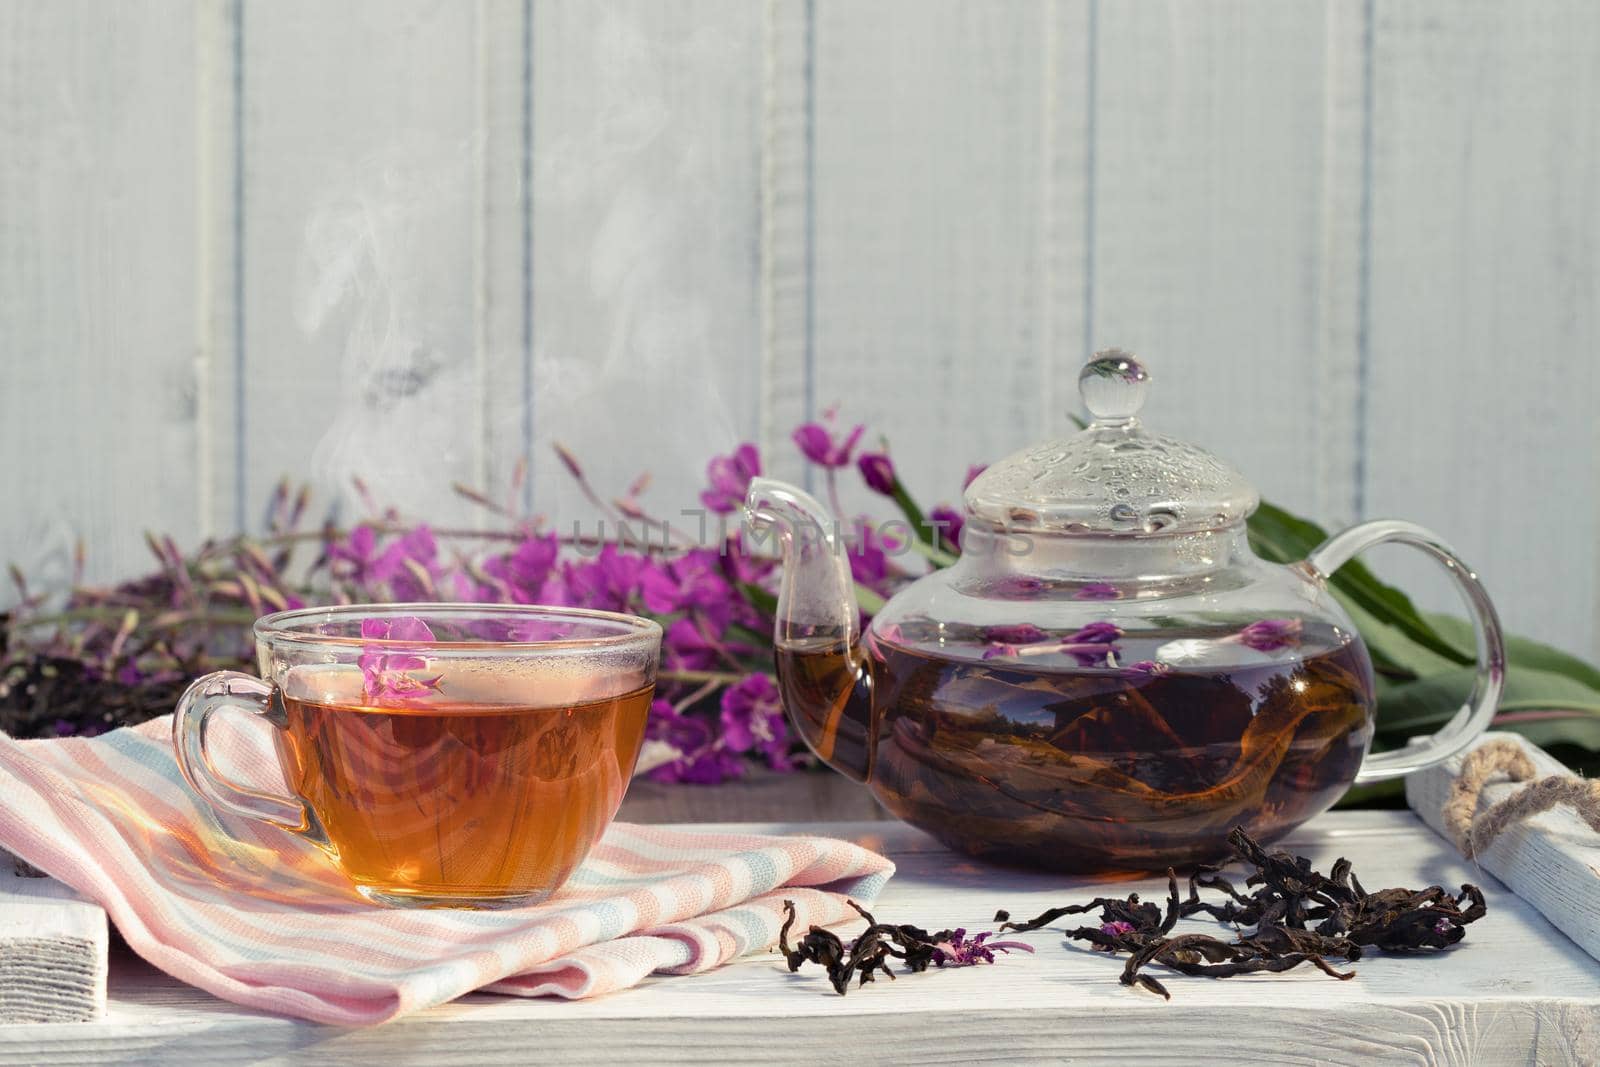 Herbal tea made from fireweed known as blooming sally in teapot and cup, copy space.